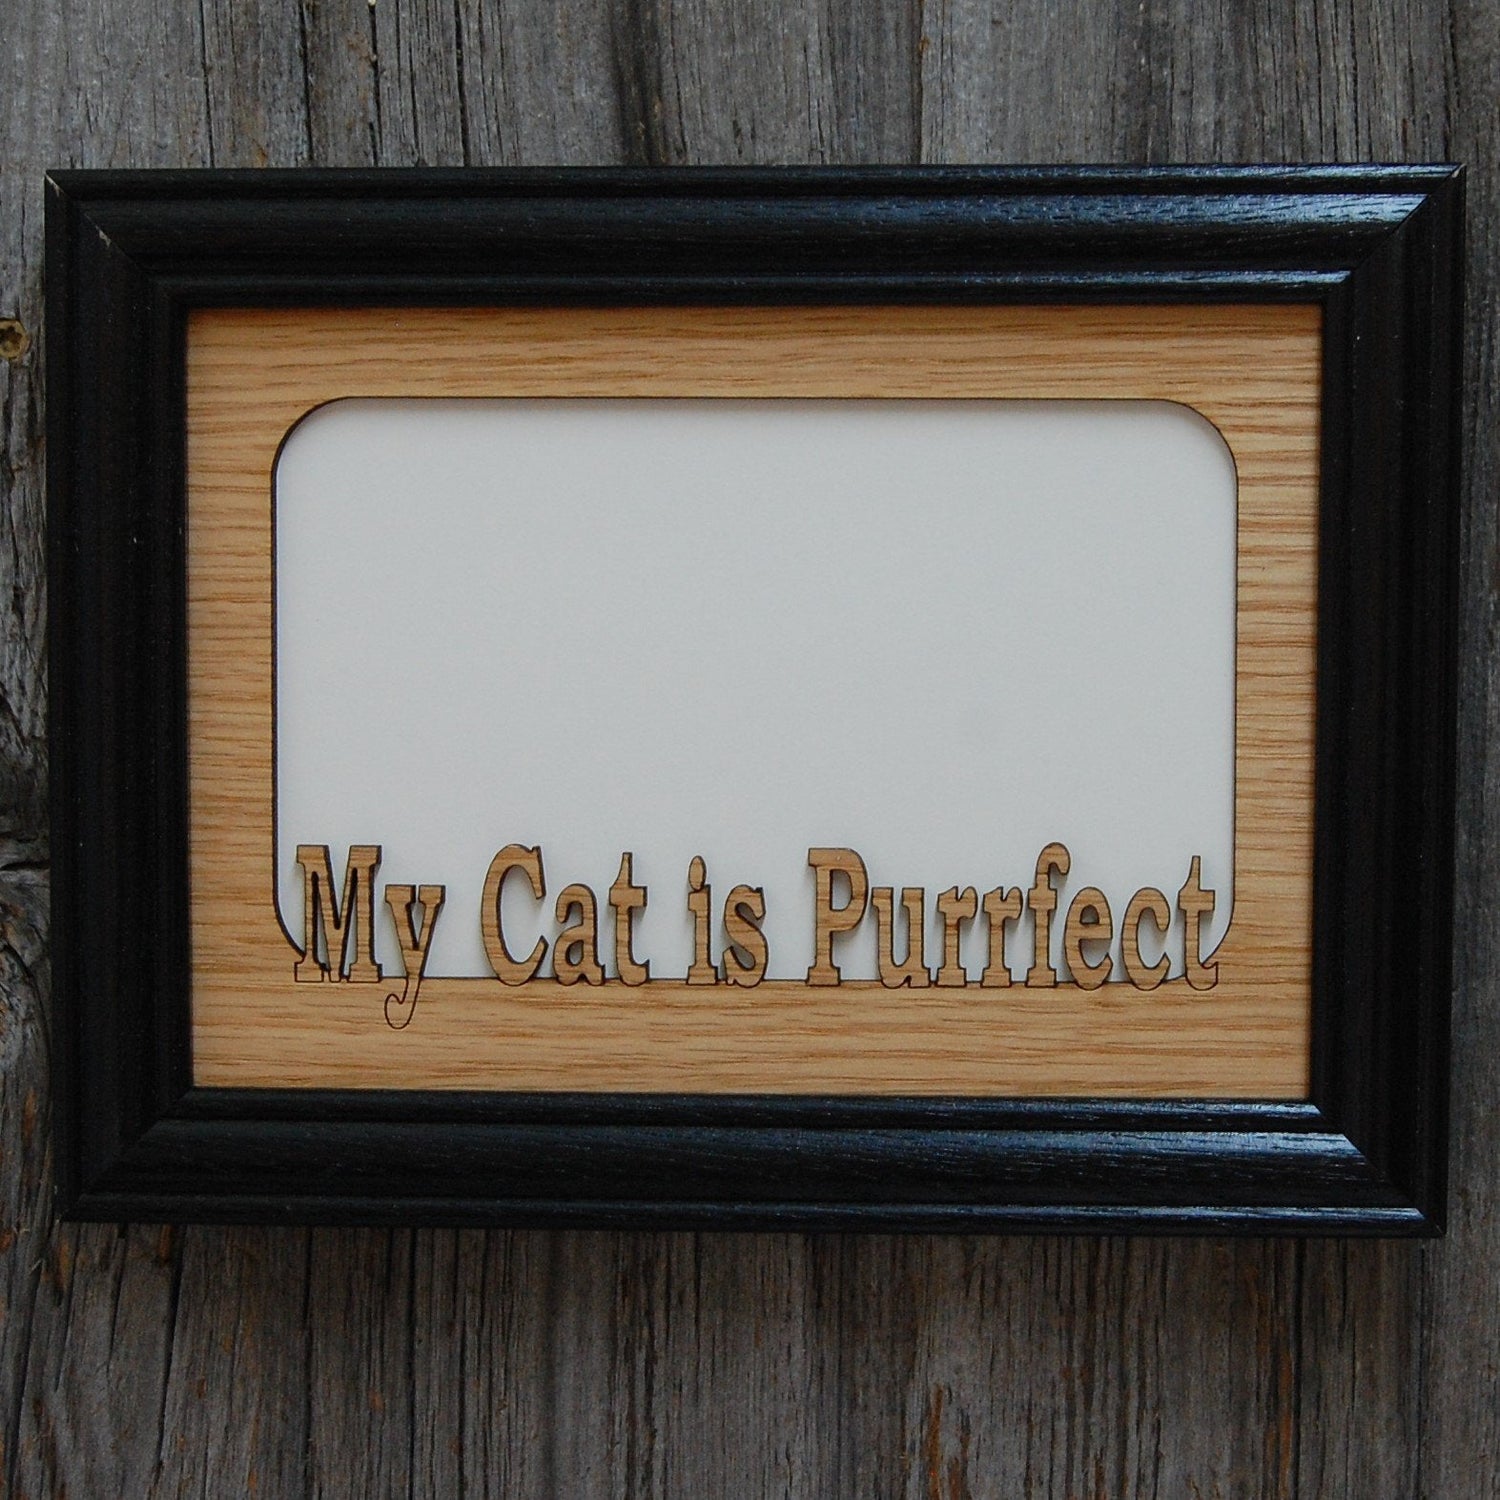 My Cat is Purrfect Picture Frame - 5x7 Frame Hold 4x6 Photo - 5x7 My Cat is Purrfect Picture Frame, Picture Frame, home decor, laser engraved - Legacy Images - Legacy Images - Picture Frames